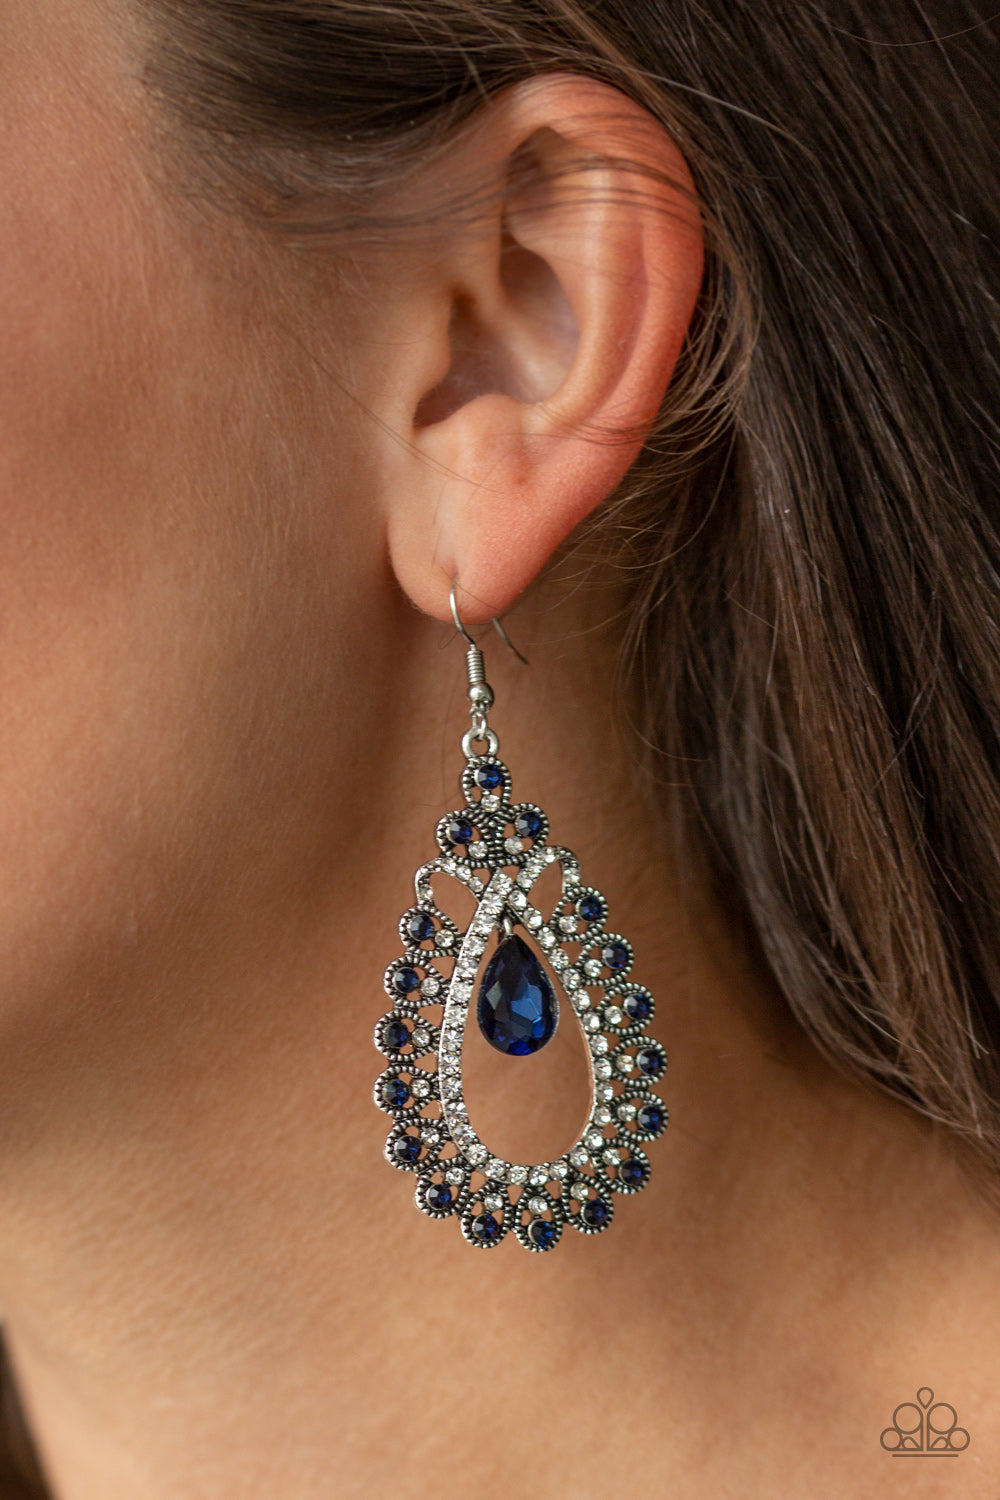 All About Business - Blue Earrings